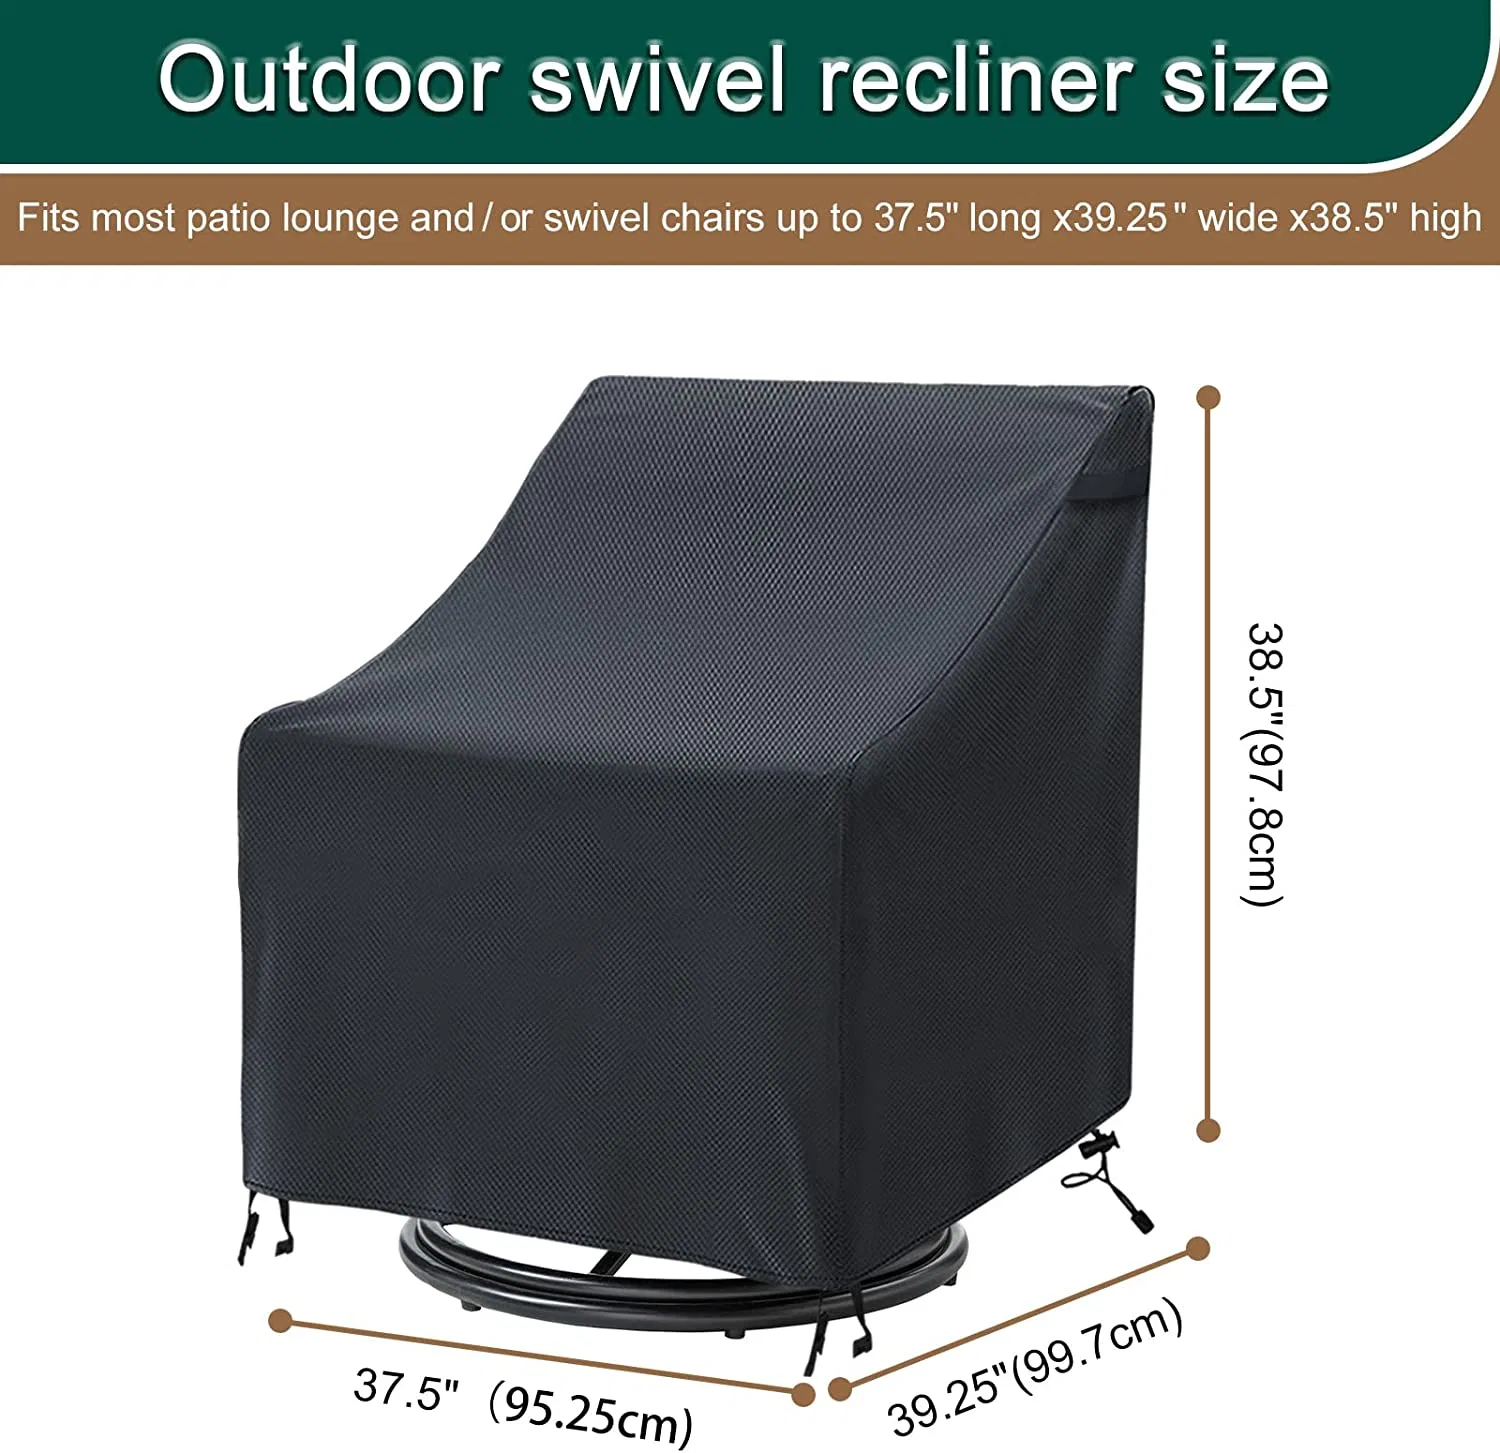 Outdoor Chair Cover 100% Waterproof Heavy-Duty Outdoor Chair Cover, Used for Outdoor Terrace Chairs with Rainproof Furniture Cover